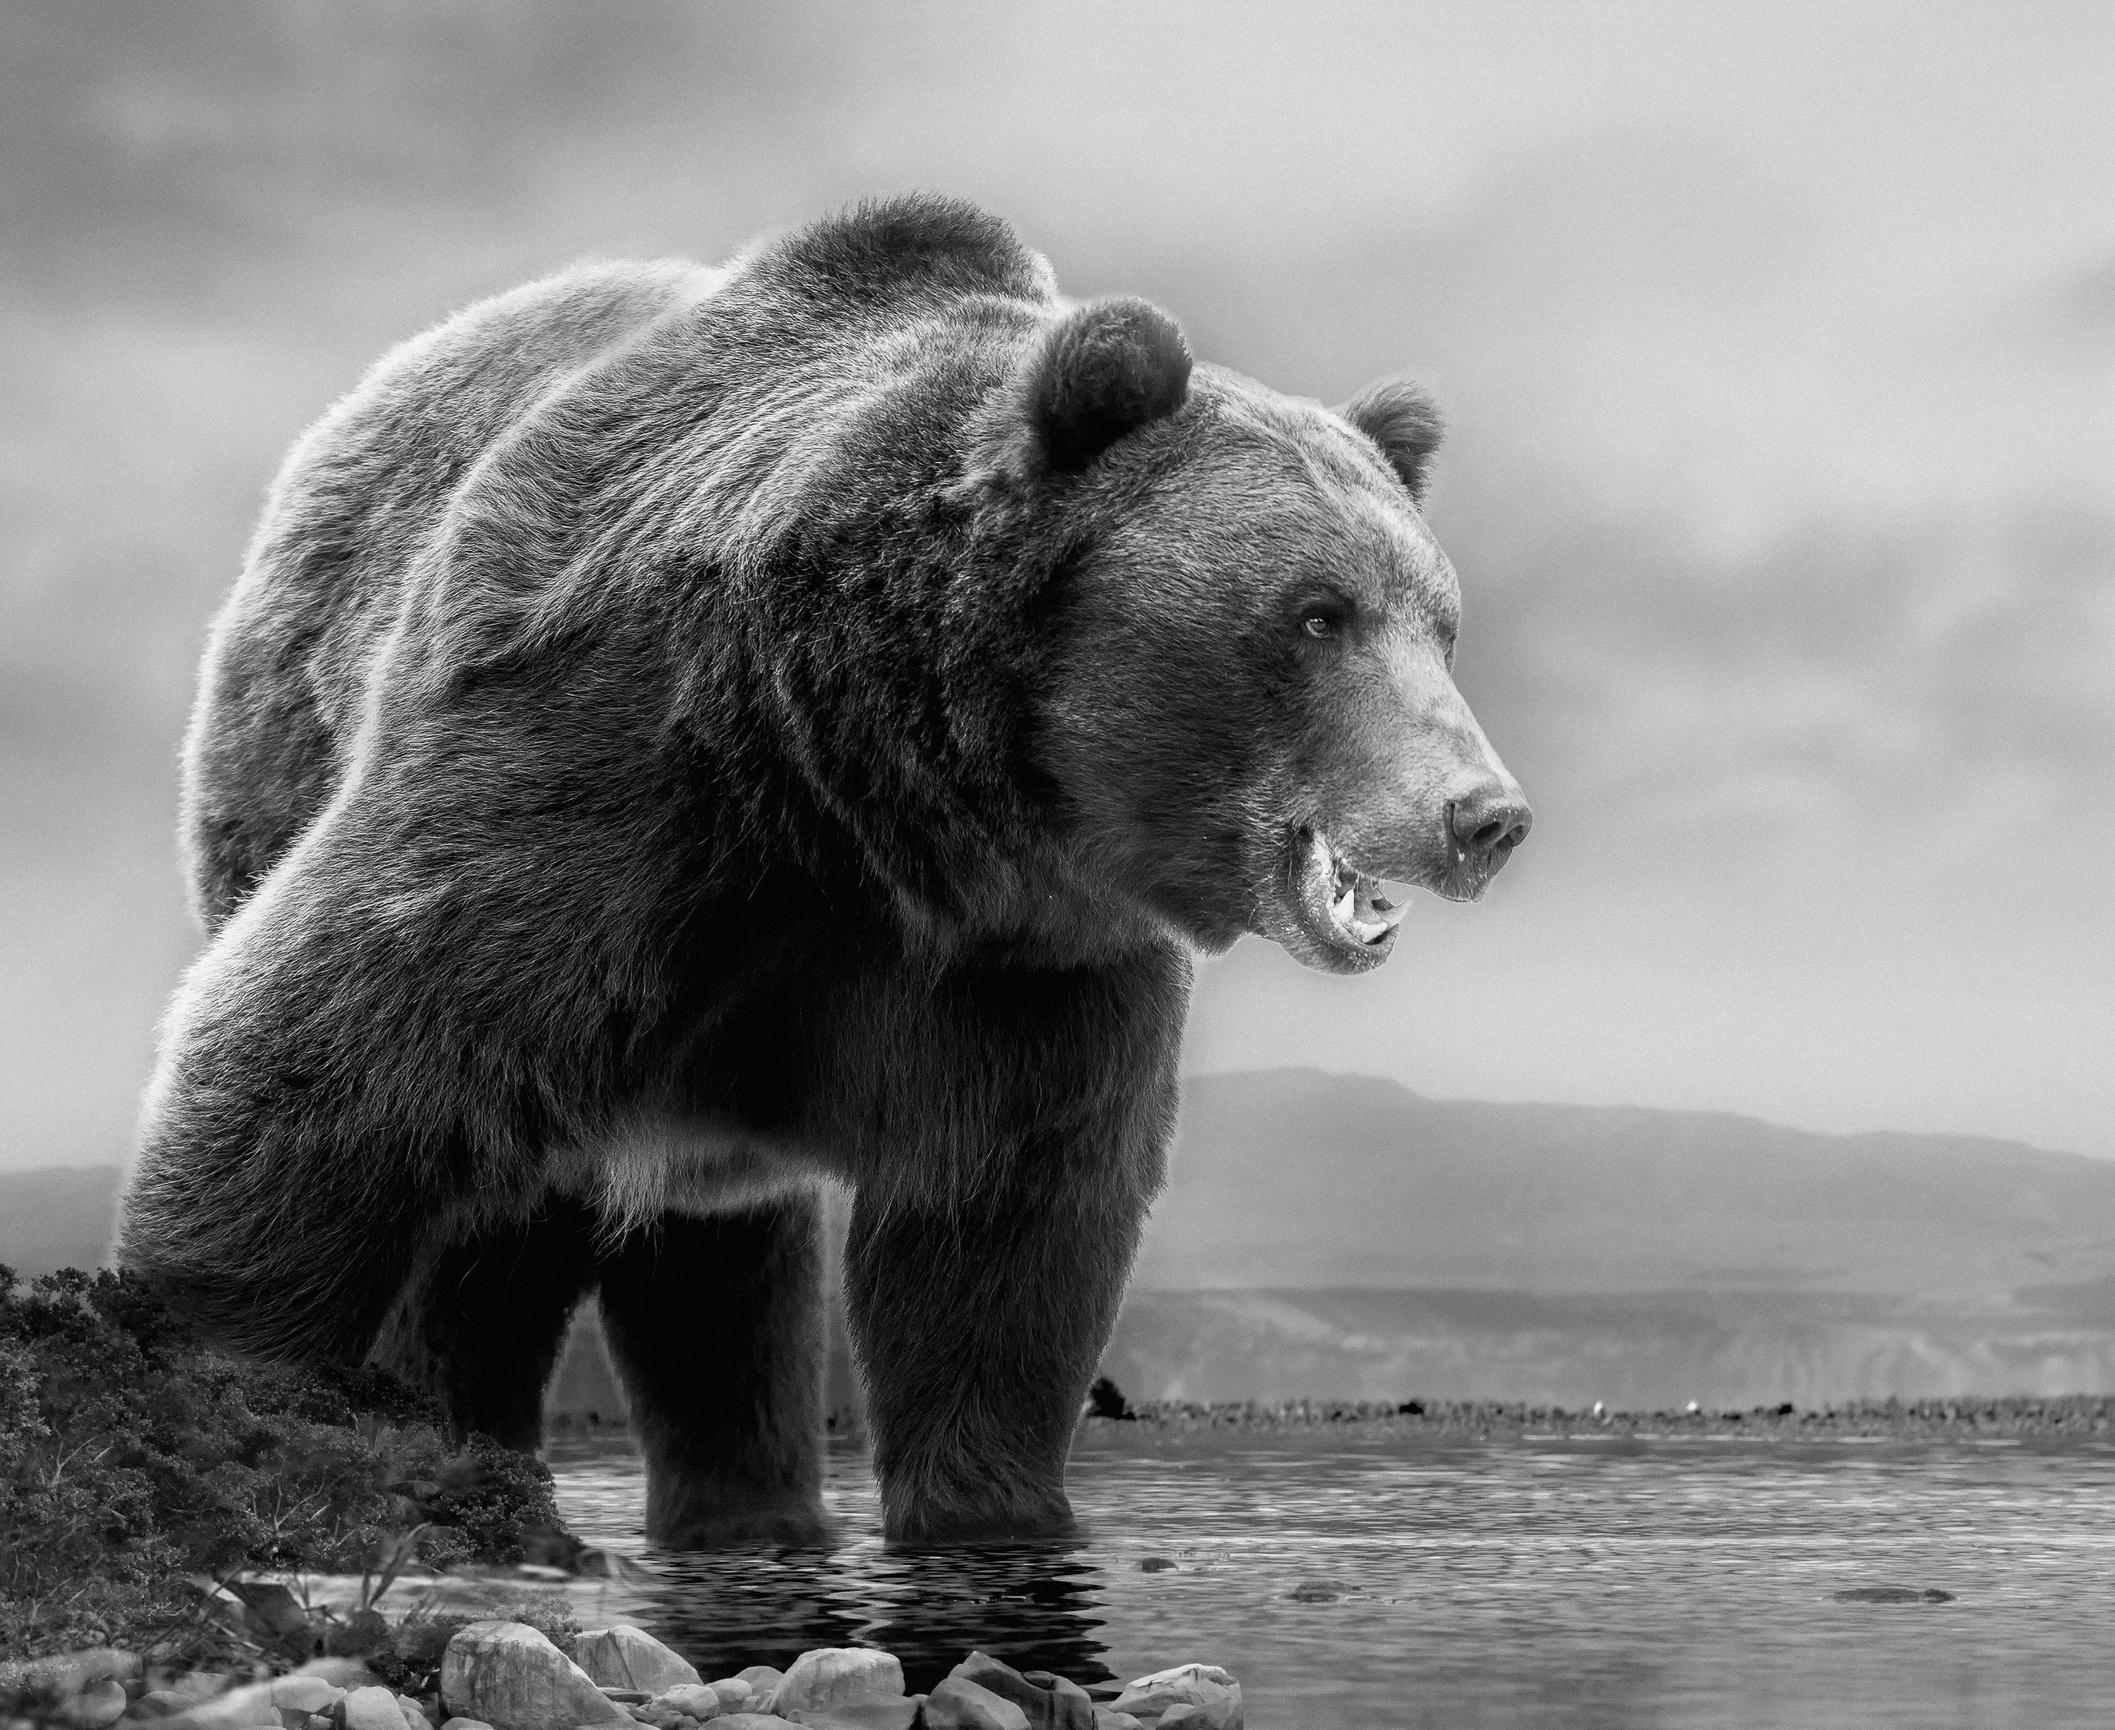 Shane Russeck Black and White Photograph - On The Waterfront - 28x40 Black & White Photography, Kodiak Bear Unsigned Print